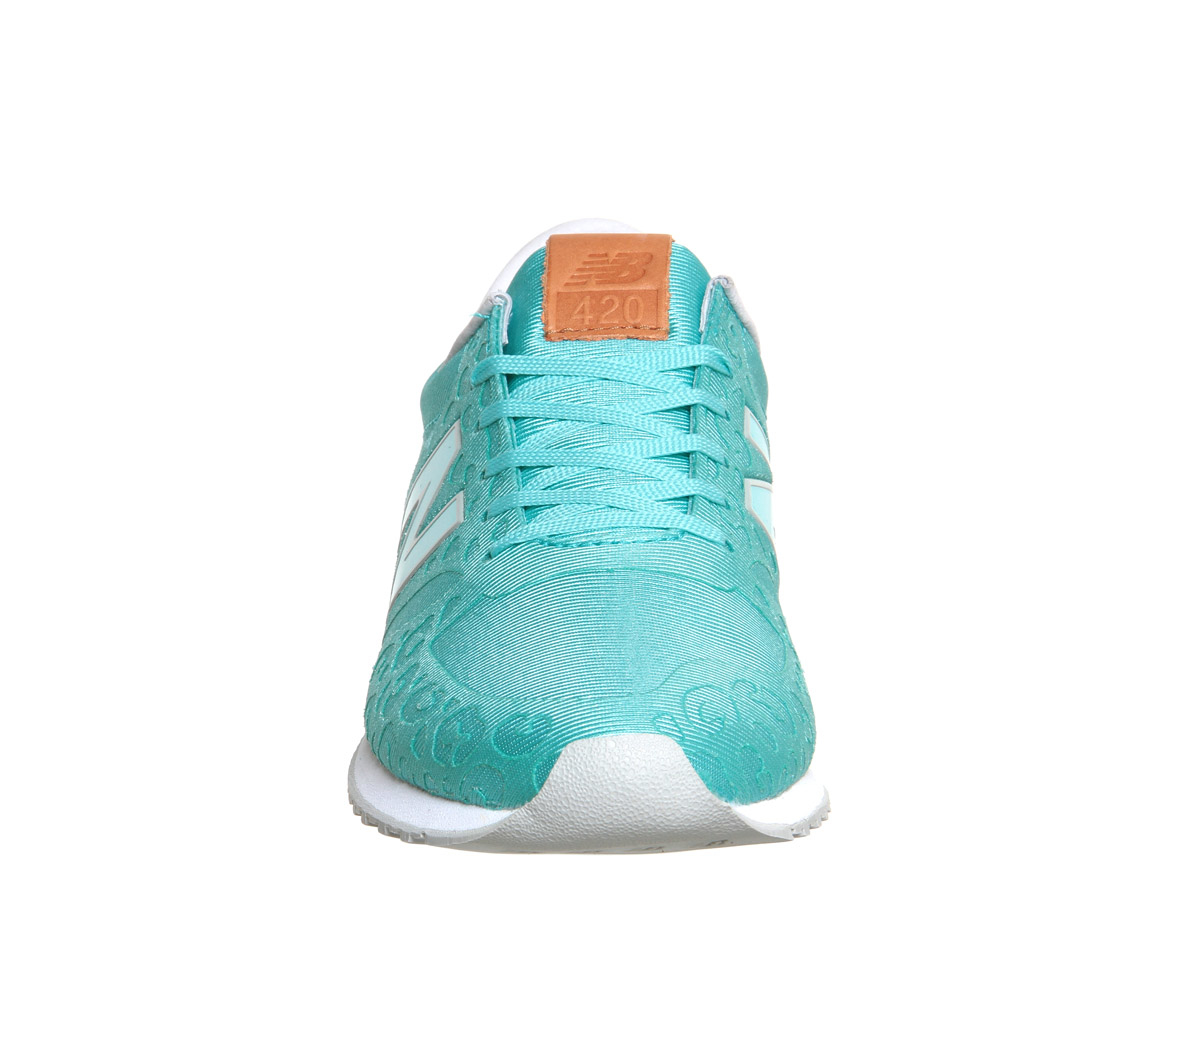 New Balance 420 Embossed-Mesh Low-Top Sneakers in Turquoise (Blue) - Lyst